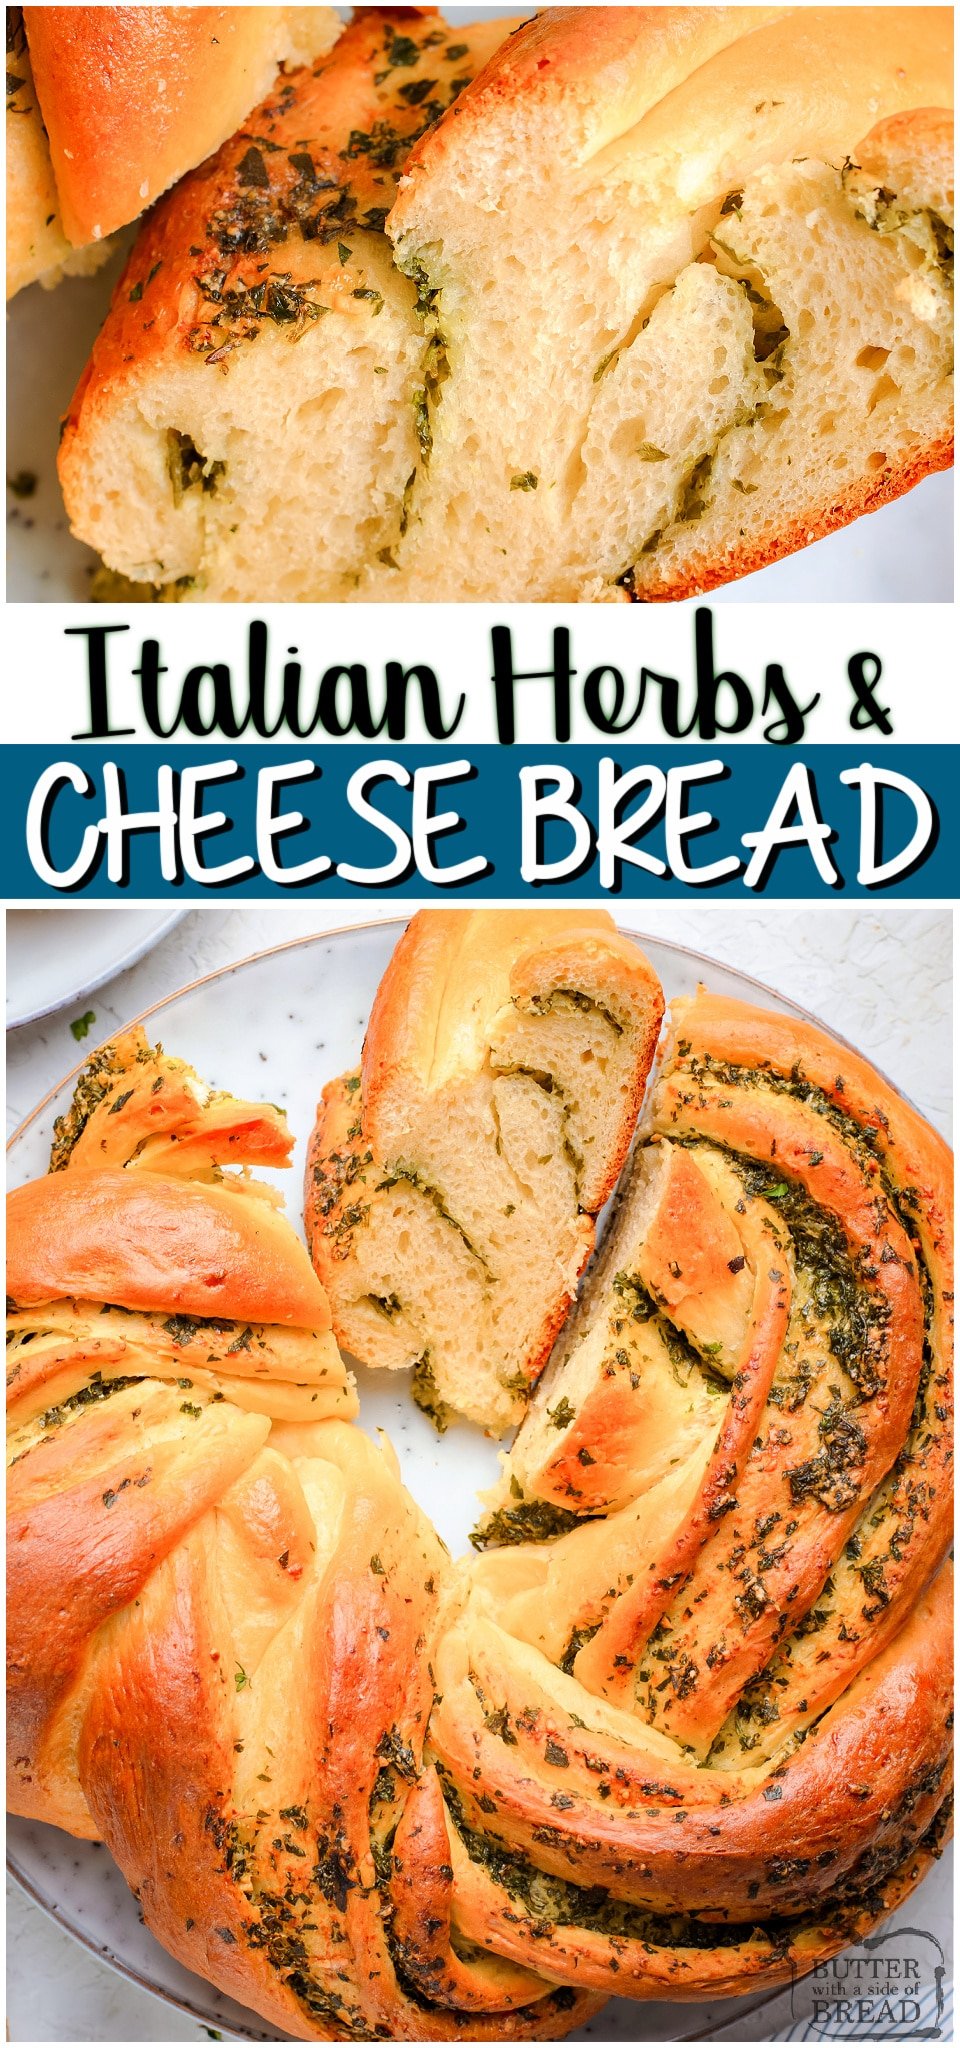 Italian Herbs & Cheese Bread is a soft, easy to make homemade bread bursting with fresh flavors! Herbs and cheese combine in this incredible savory bread recipe.